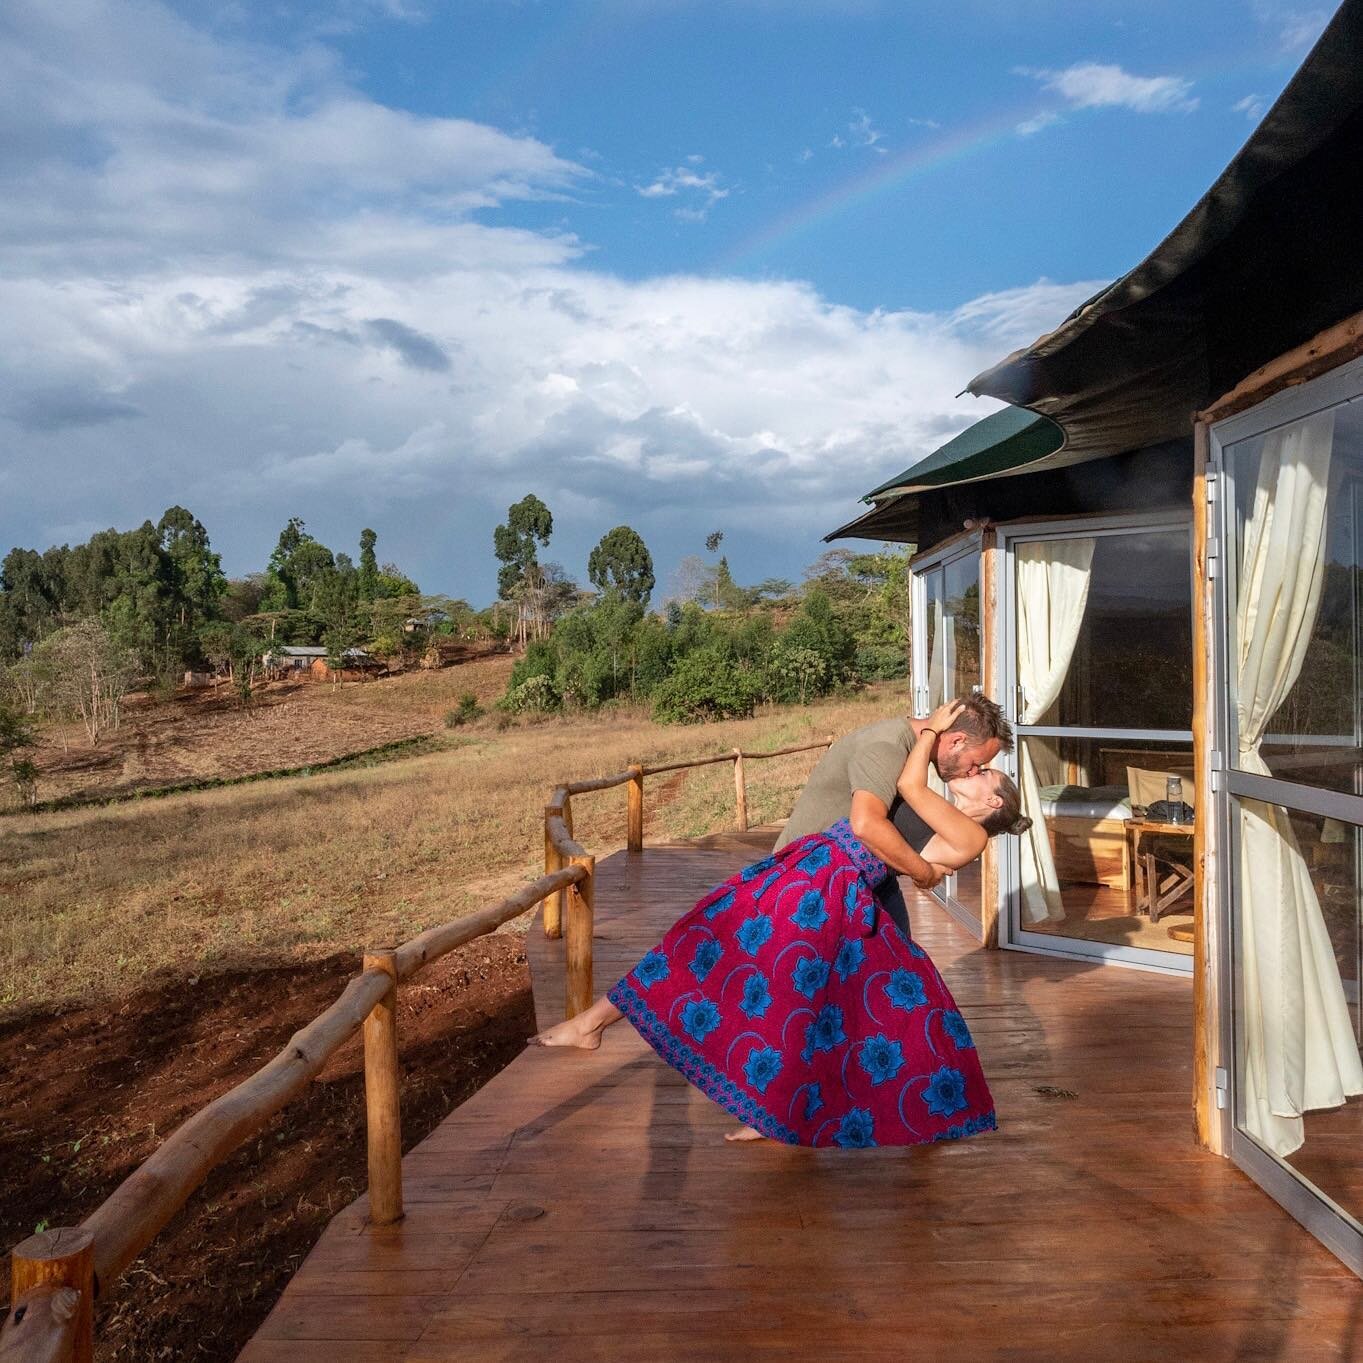 💫 Save this post for your Tanzania safari!

Tanzania&rsquo;s fantastic Ngorongoro Crater is one of our favorite places in the entire world. On this trip we were lucky to find our new home away from home there in @foresight.lodge !

We&rsquo;ve been 